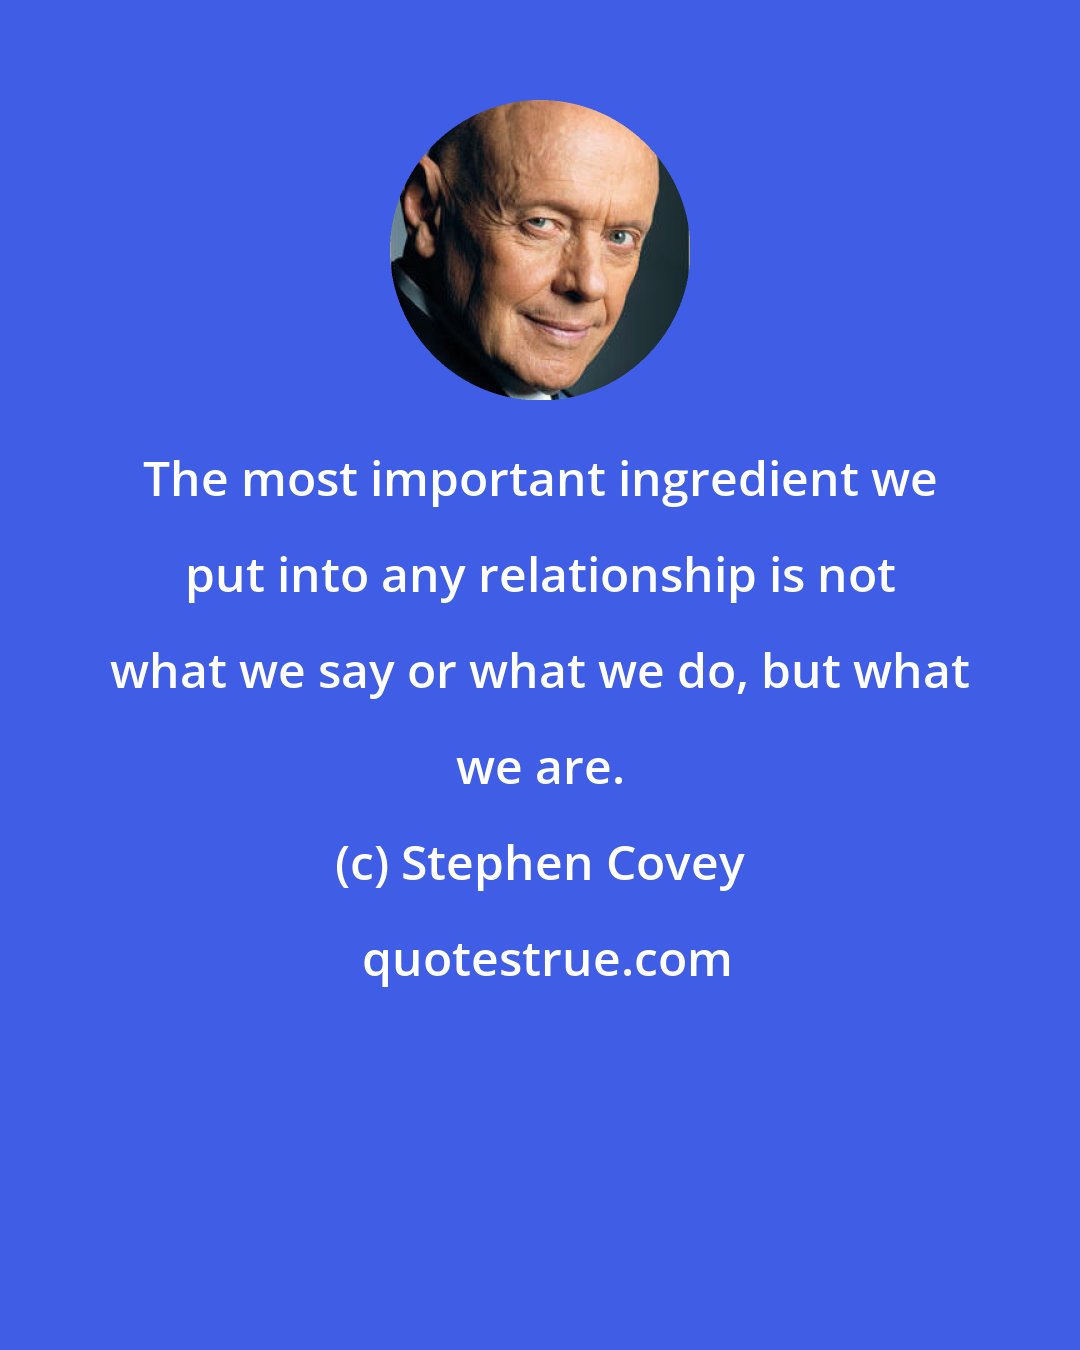 Stephen Covey: The most important ingredient we put into any relationship is not what we say or what we do, but what we are.